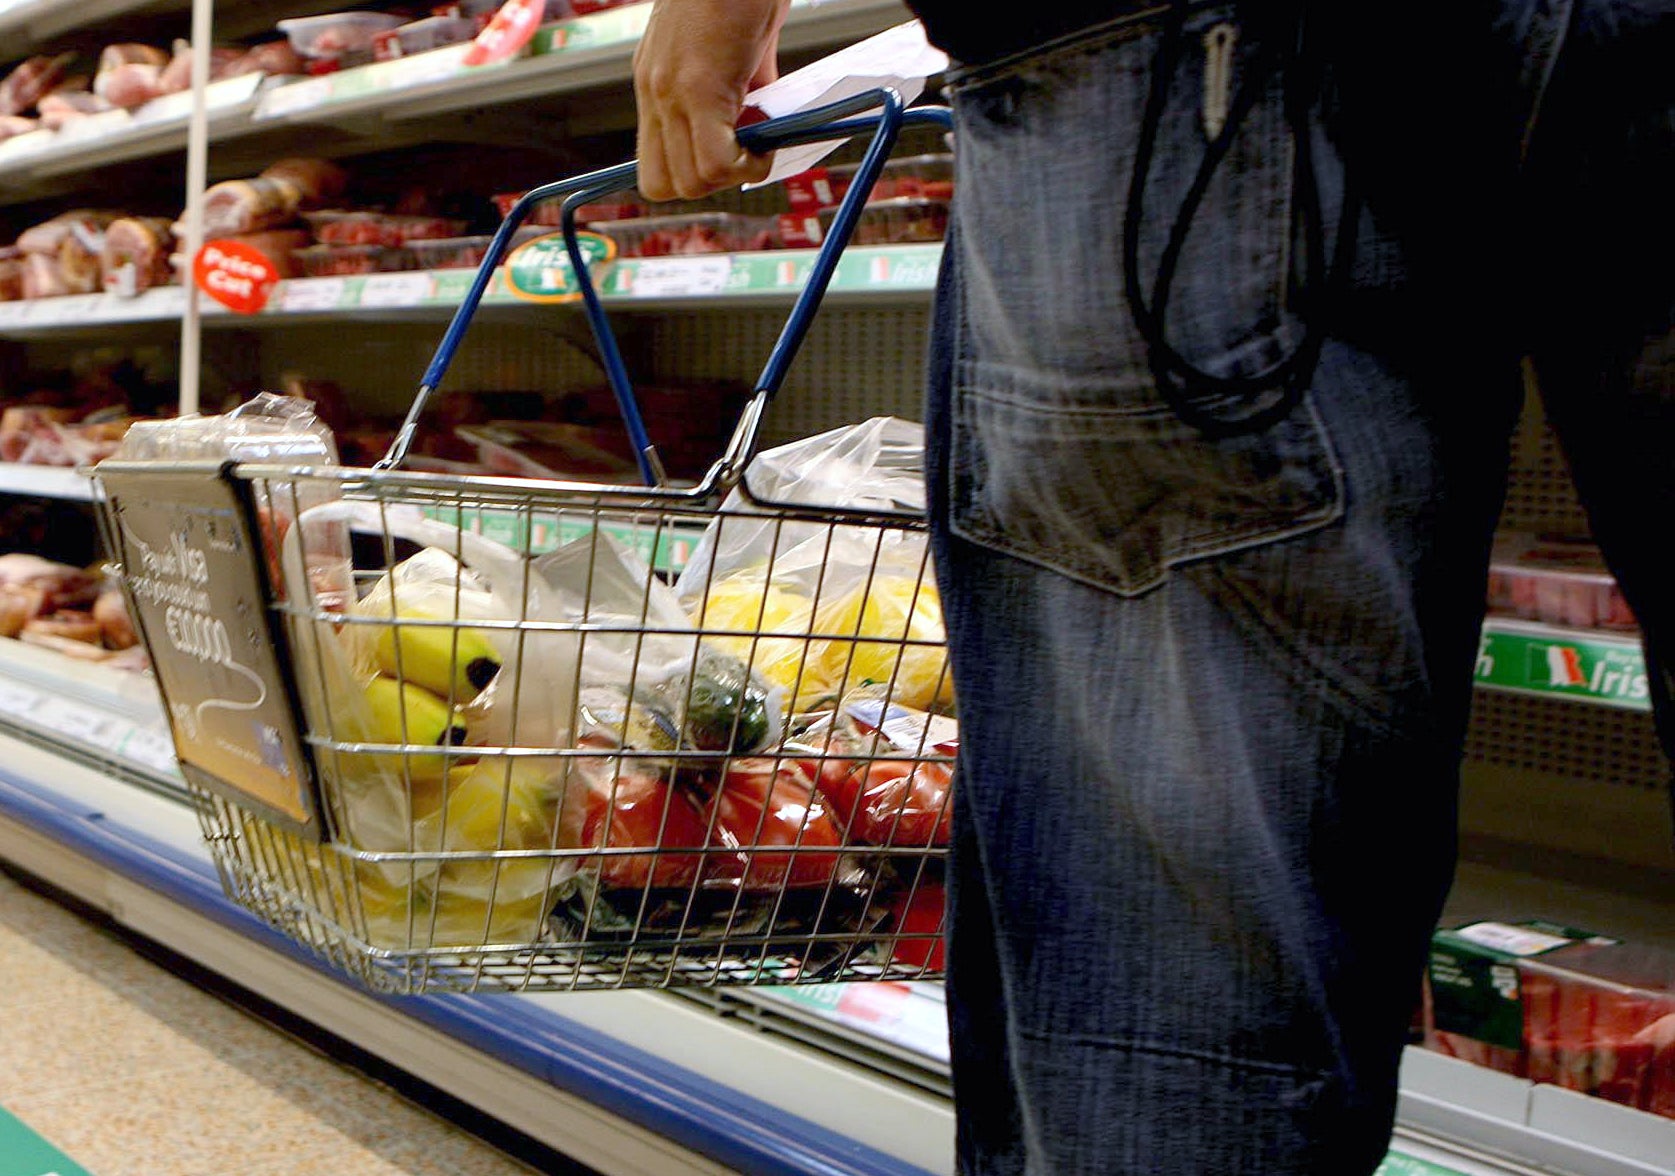 Shoppers have felt the pinch from high prices